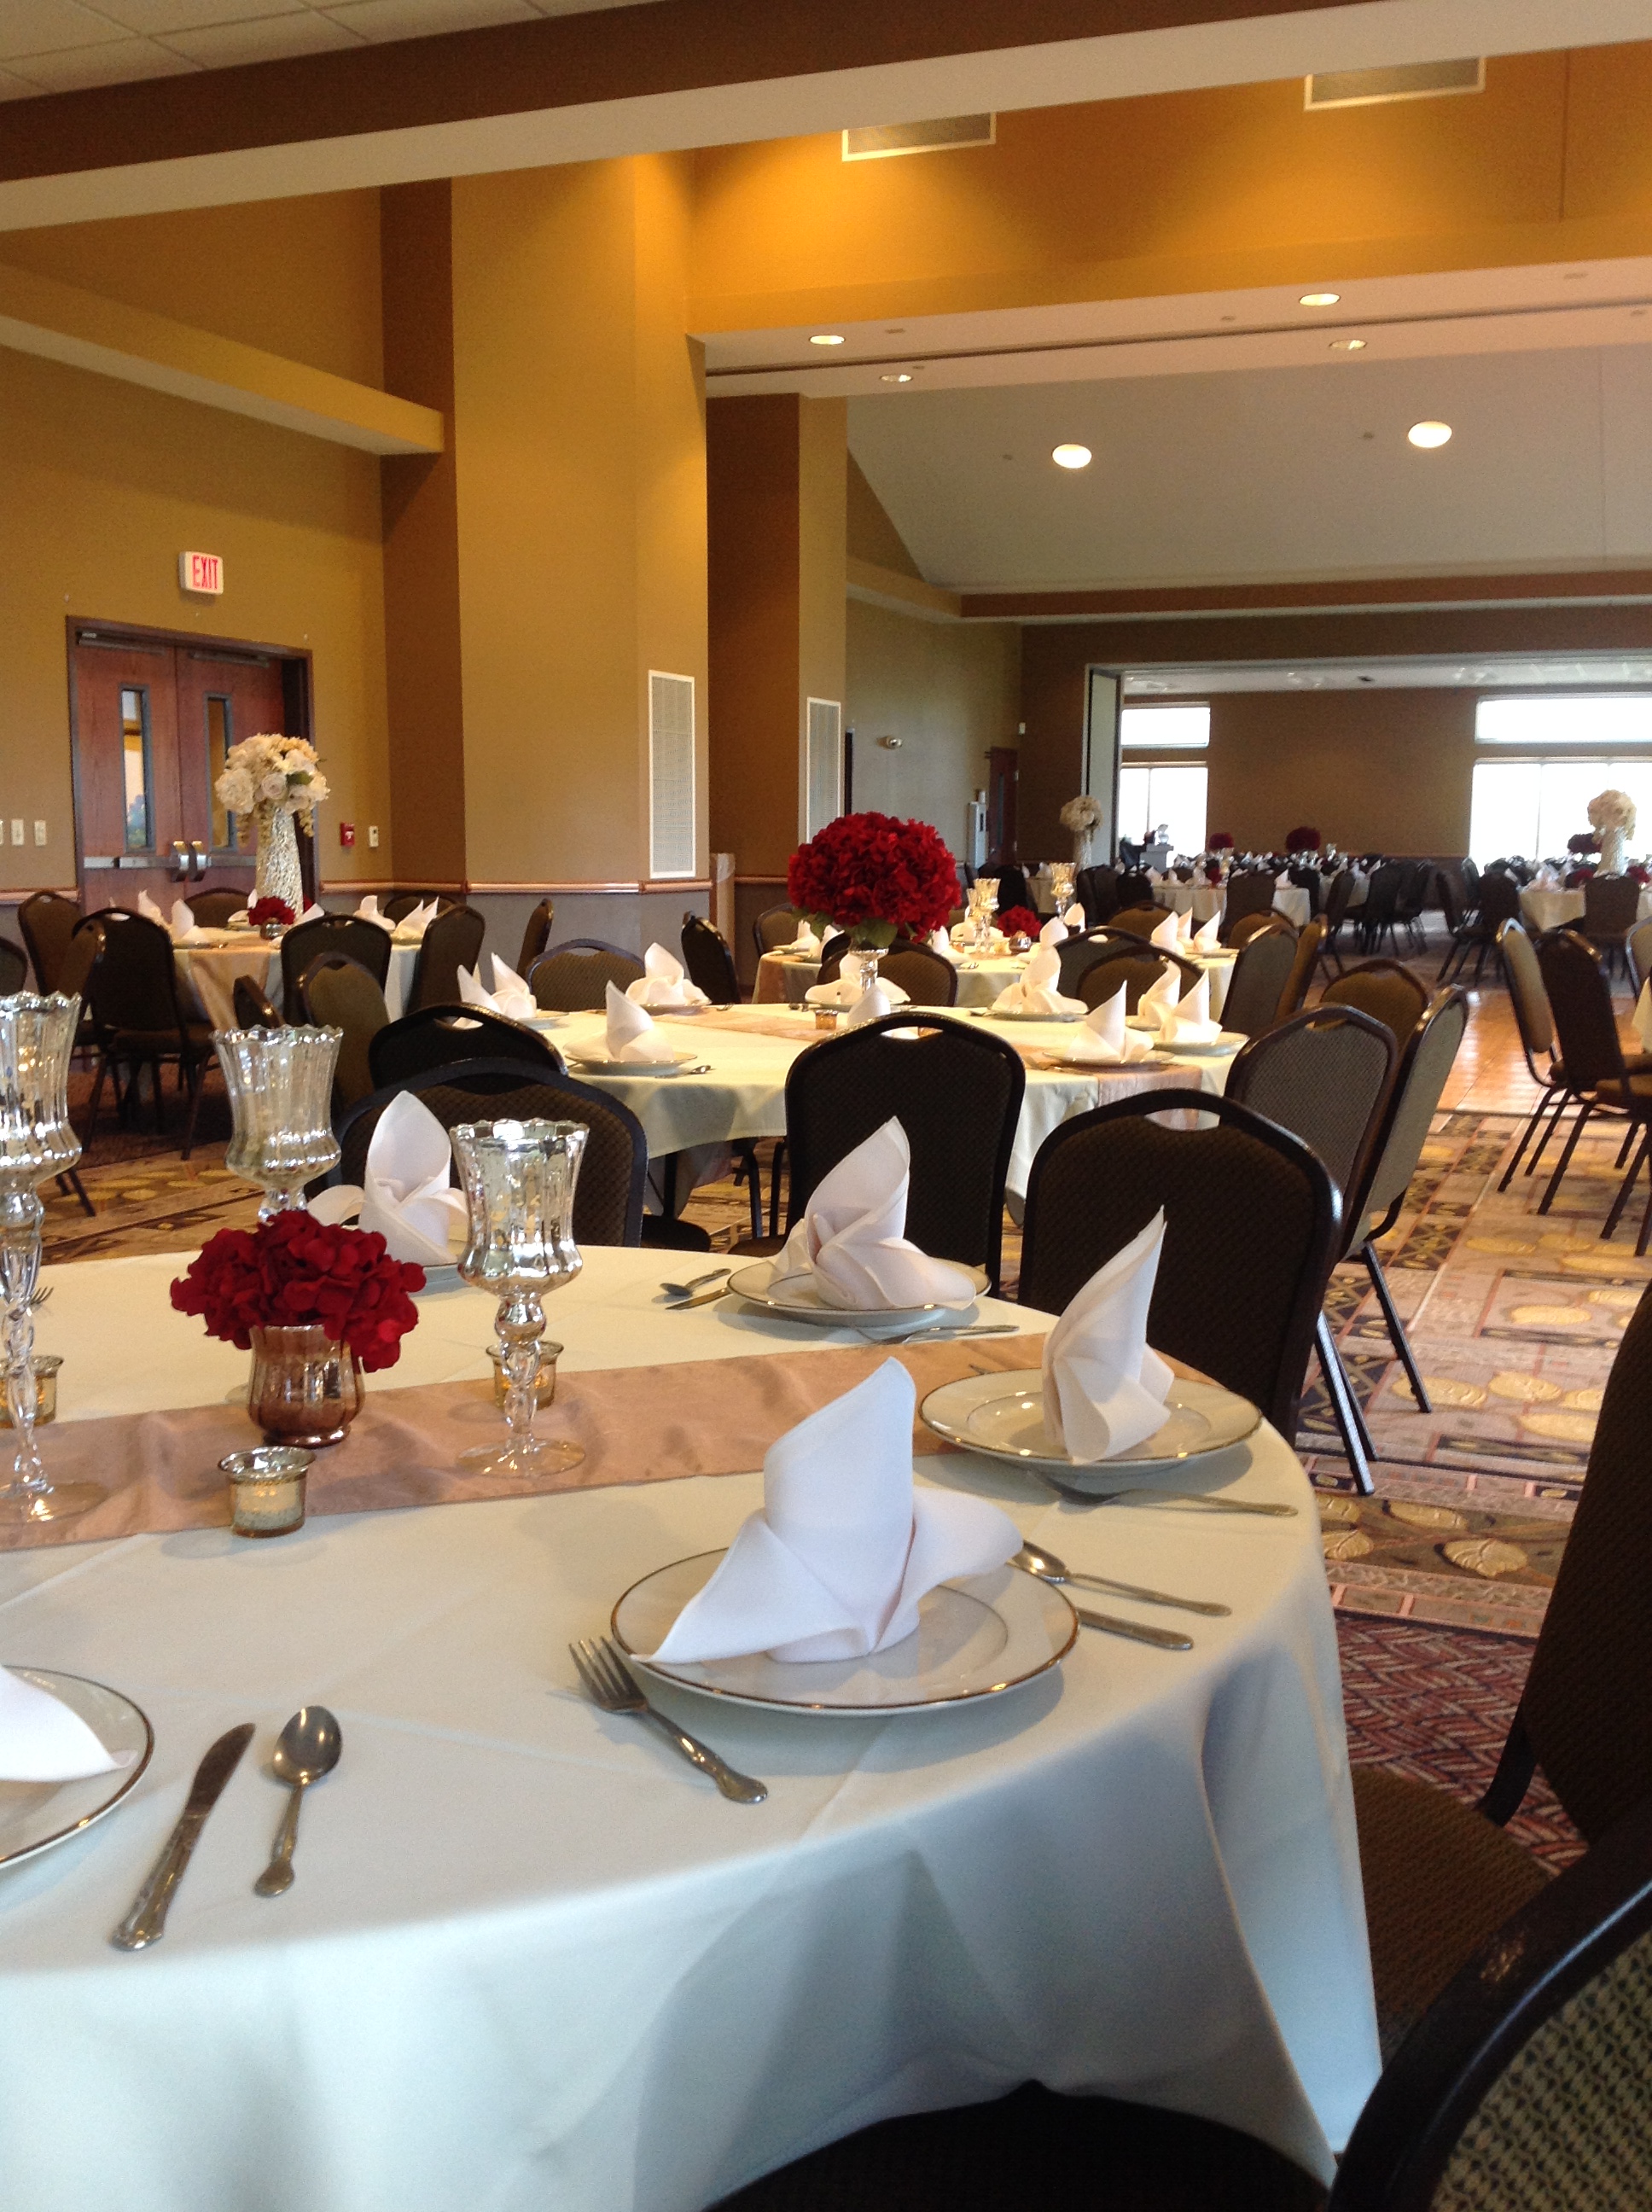 Tables set for a wedding at Boulders Event Center